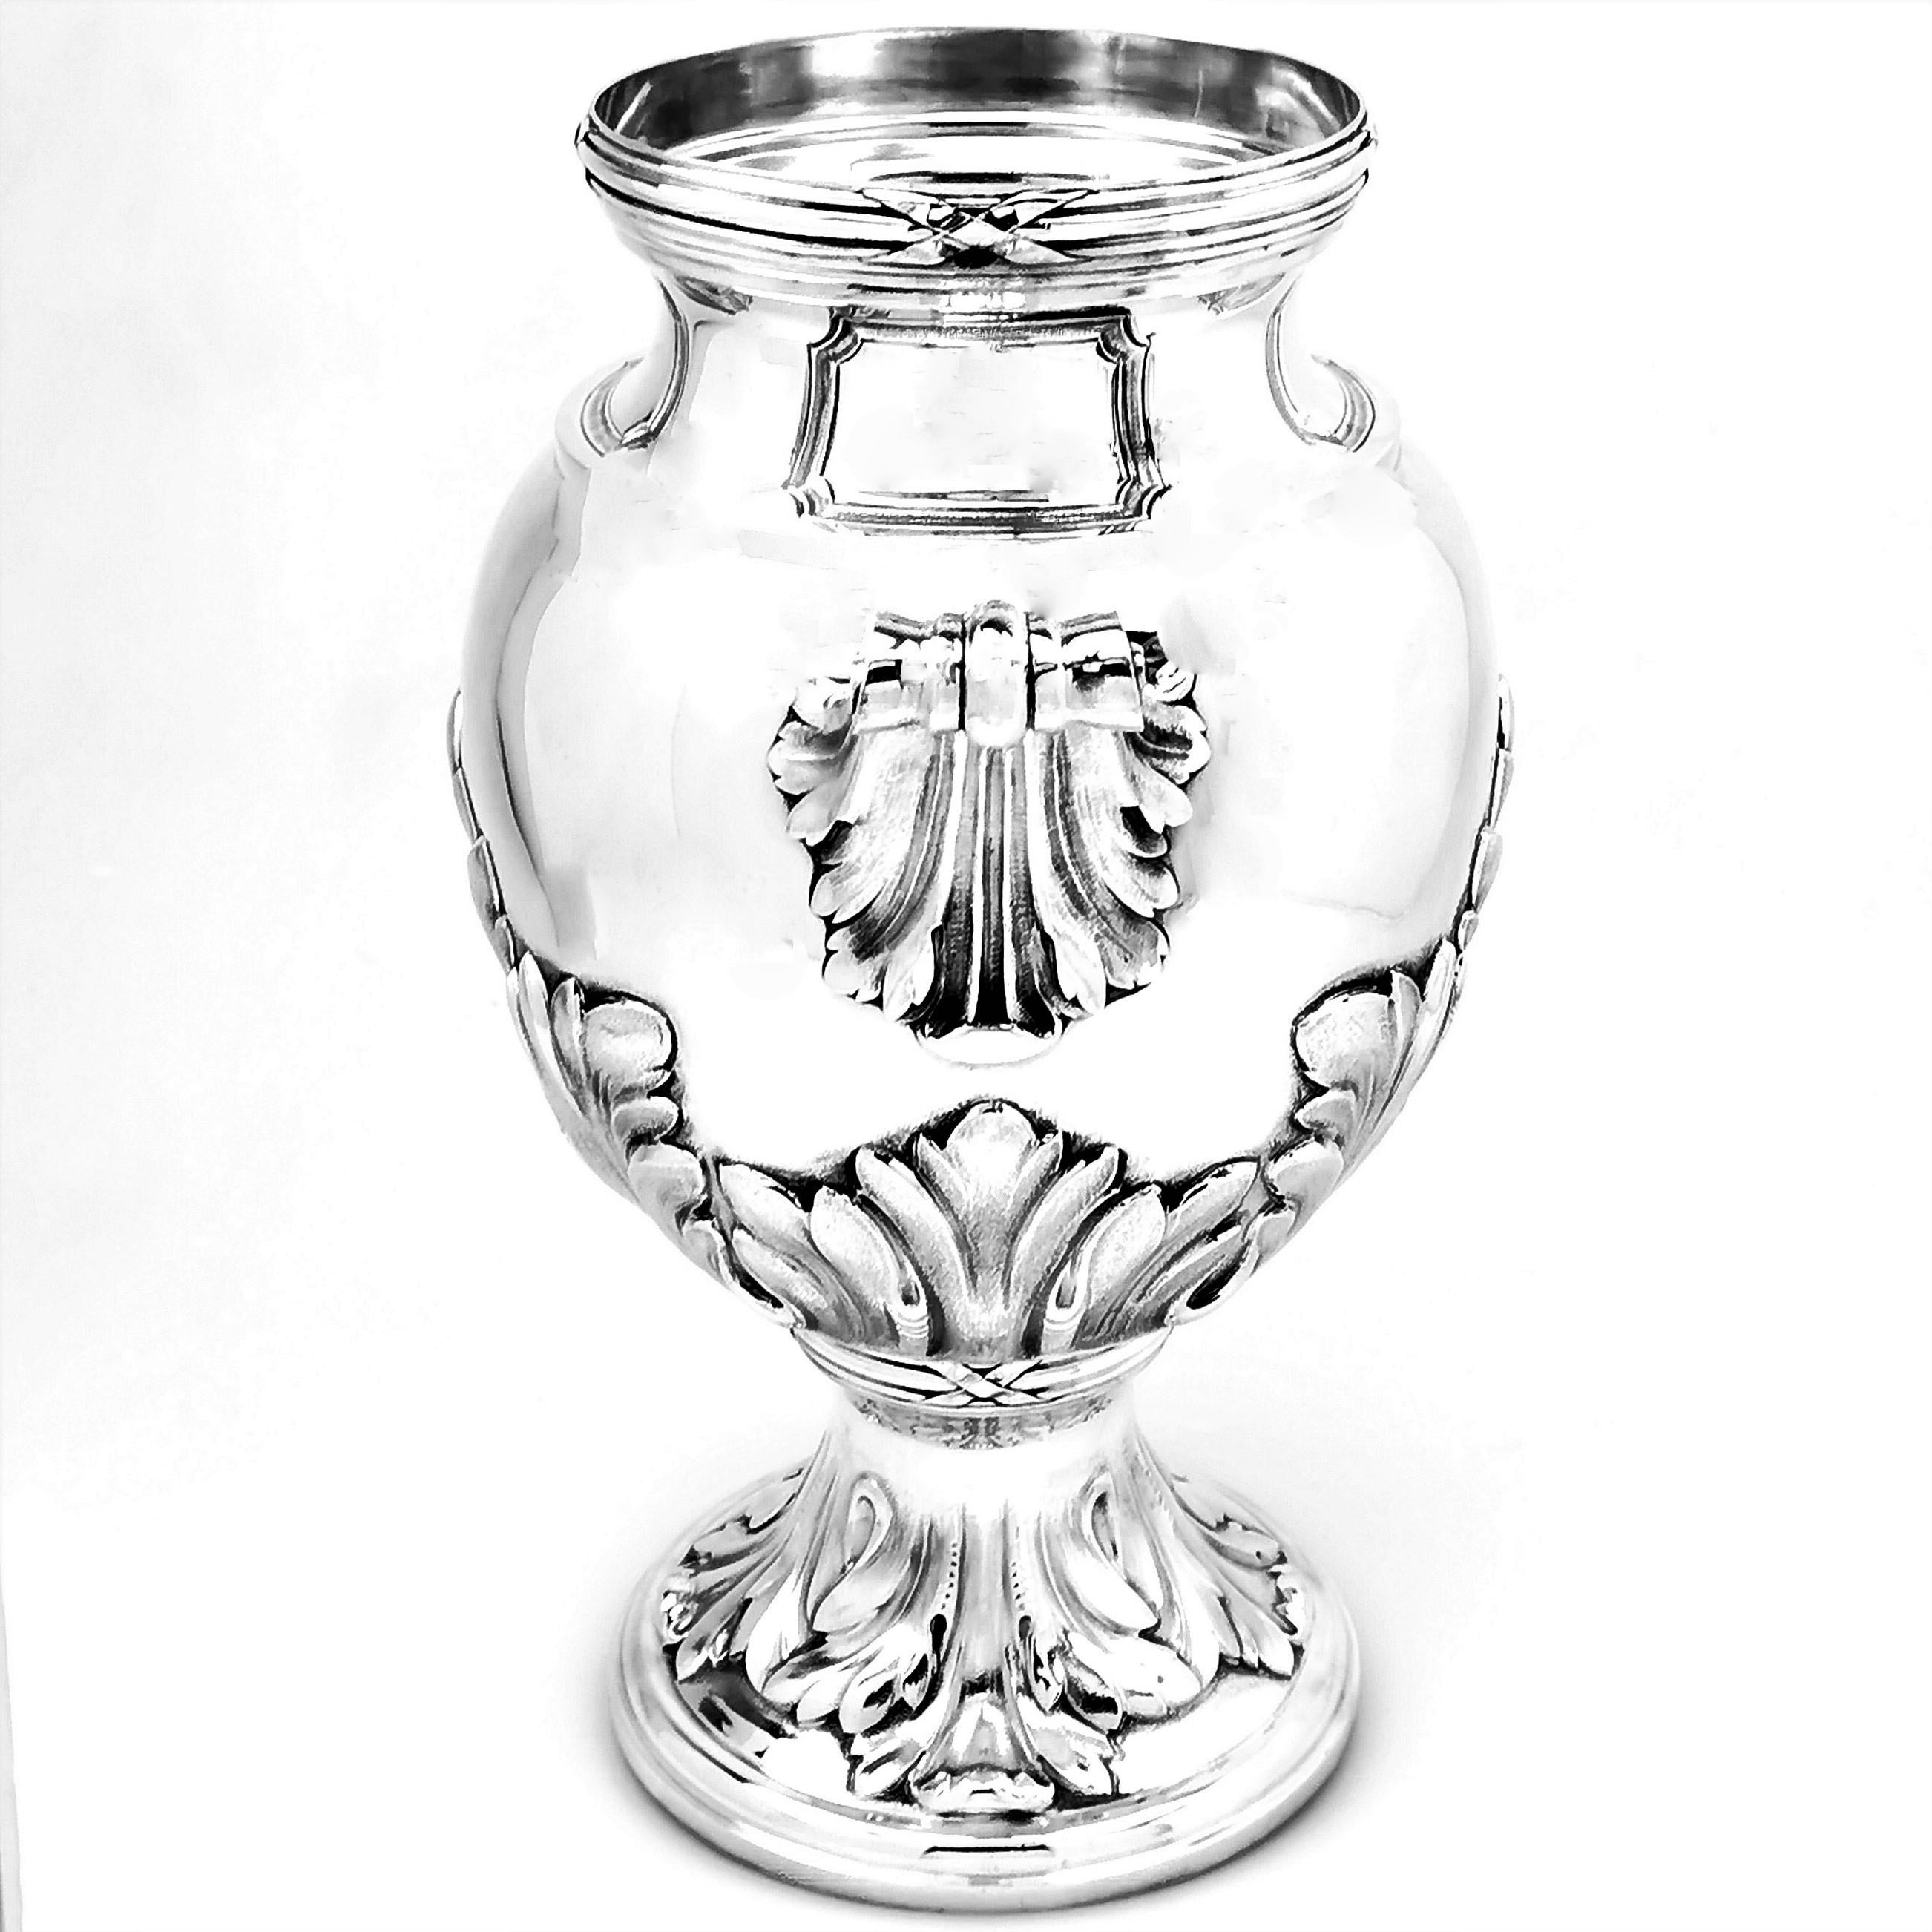 An impressive Antique French solid Silver Vase decorated with two substantial stylised leaf handles, The Body of the Vase and the spread foot are embellished with applied stylised leaves with a subtle matted finish against the polished body of the